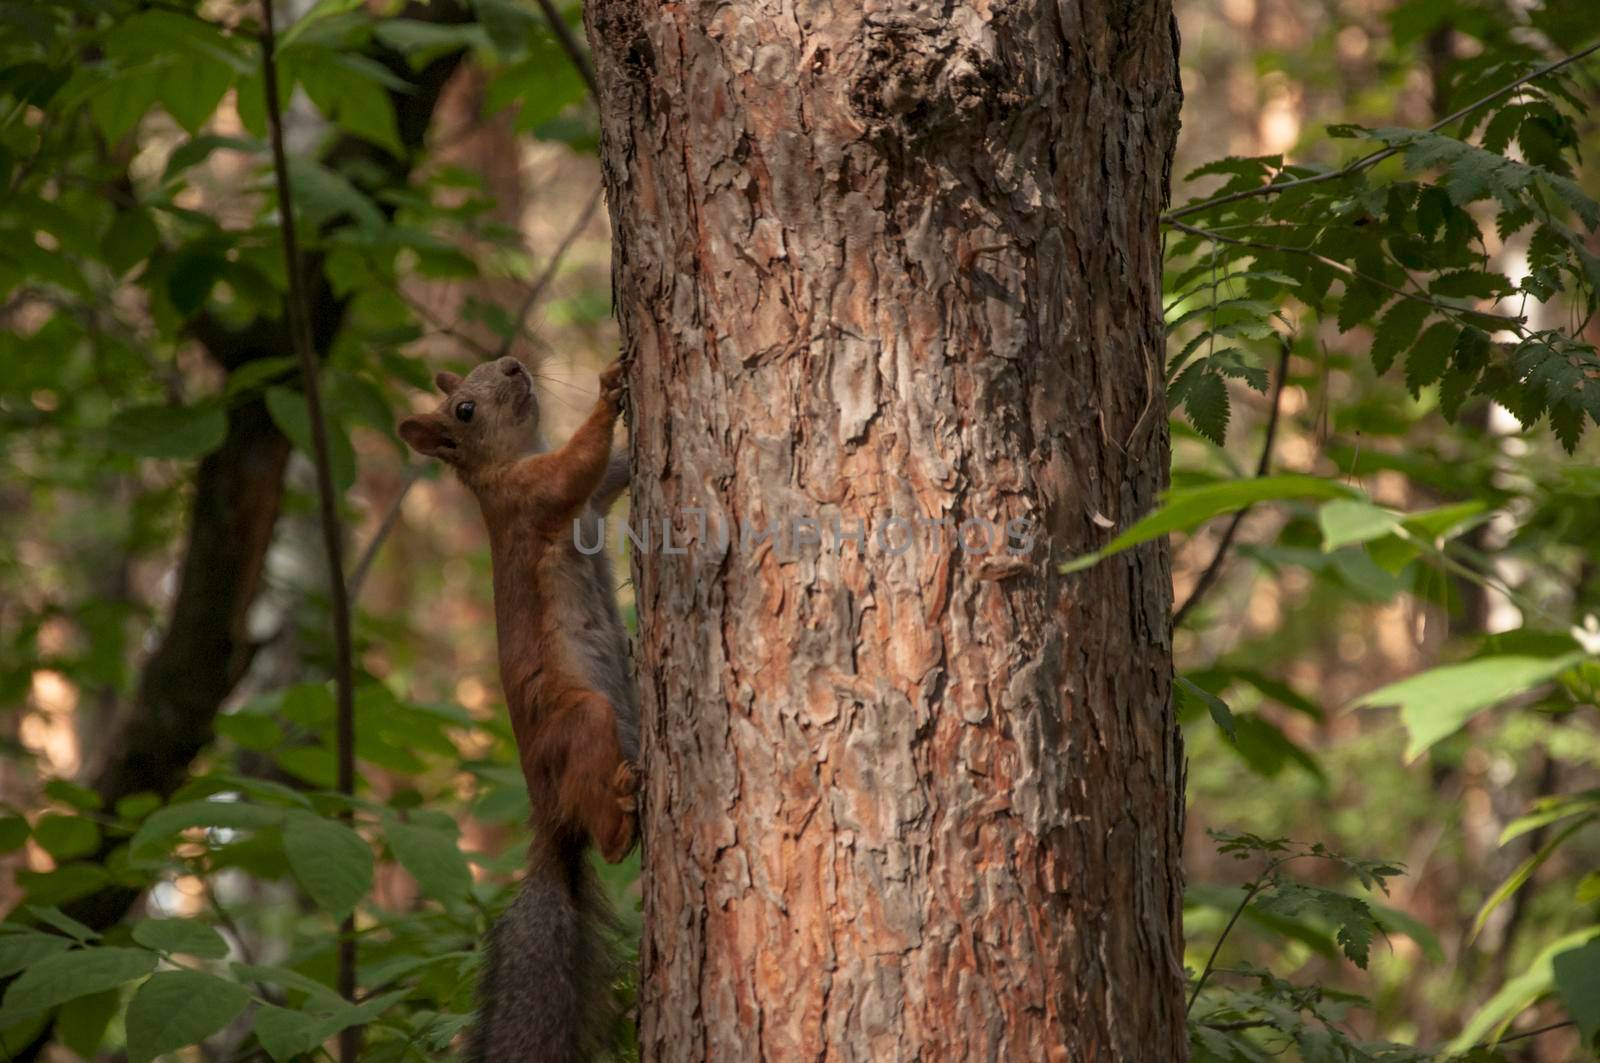 Squirrel on the tree in the summer park by inxti